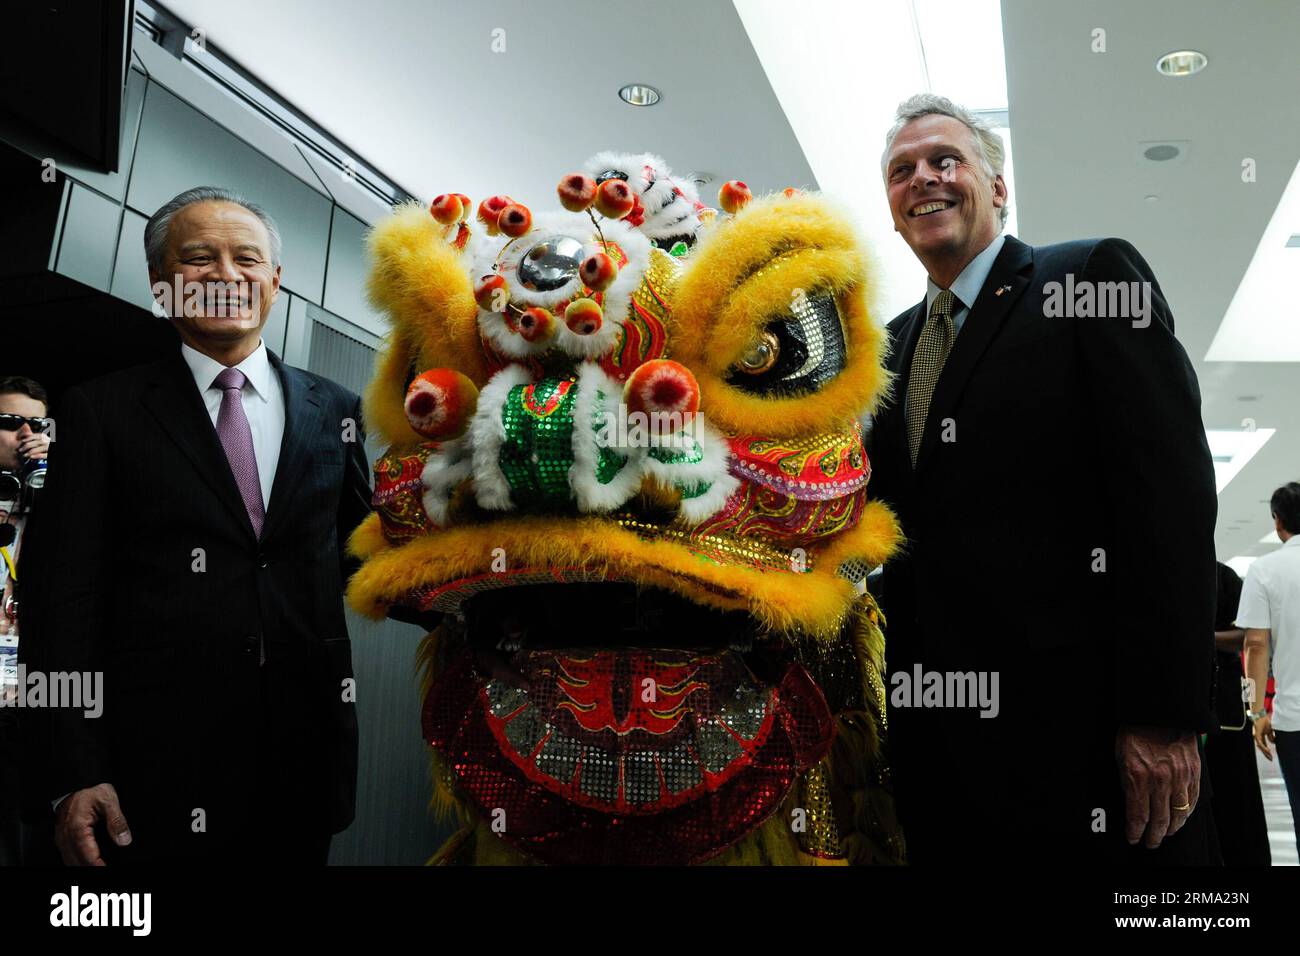 (140611) -- DULLES AIRPORT, June 11, 2014 (Xinhua) -- Chinese ambassador to the United States Cui Tiankai (L) and Virginia Governor Terry McAuliffe pose for photos during a ceremony marking the start of Air China s direct flight from Beijing to Washington at Dulles Airport in Sterling, Virginia, the United States, on June 10, 2014. Air China launched the direct flight from Beijing to Washington on Tuesday. (Xinhua/Bao Dandan) U.S.-BEJING-WASHINGTON-DIRECT FLIGHT PUBLICATIONxNOTxINxCHN   Dulles Airport June 11 2014 XINHUA Chinese Ambassador to The United States Cui Tiankai l and Virginia Govern Stock Photo